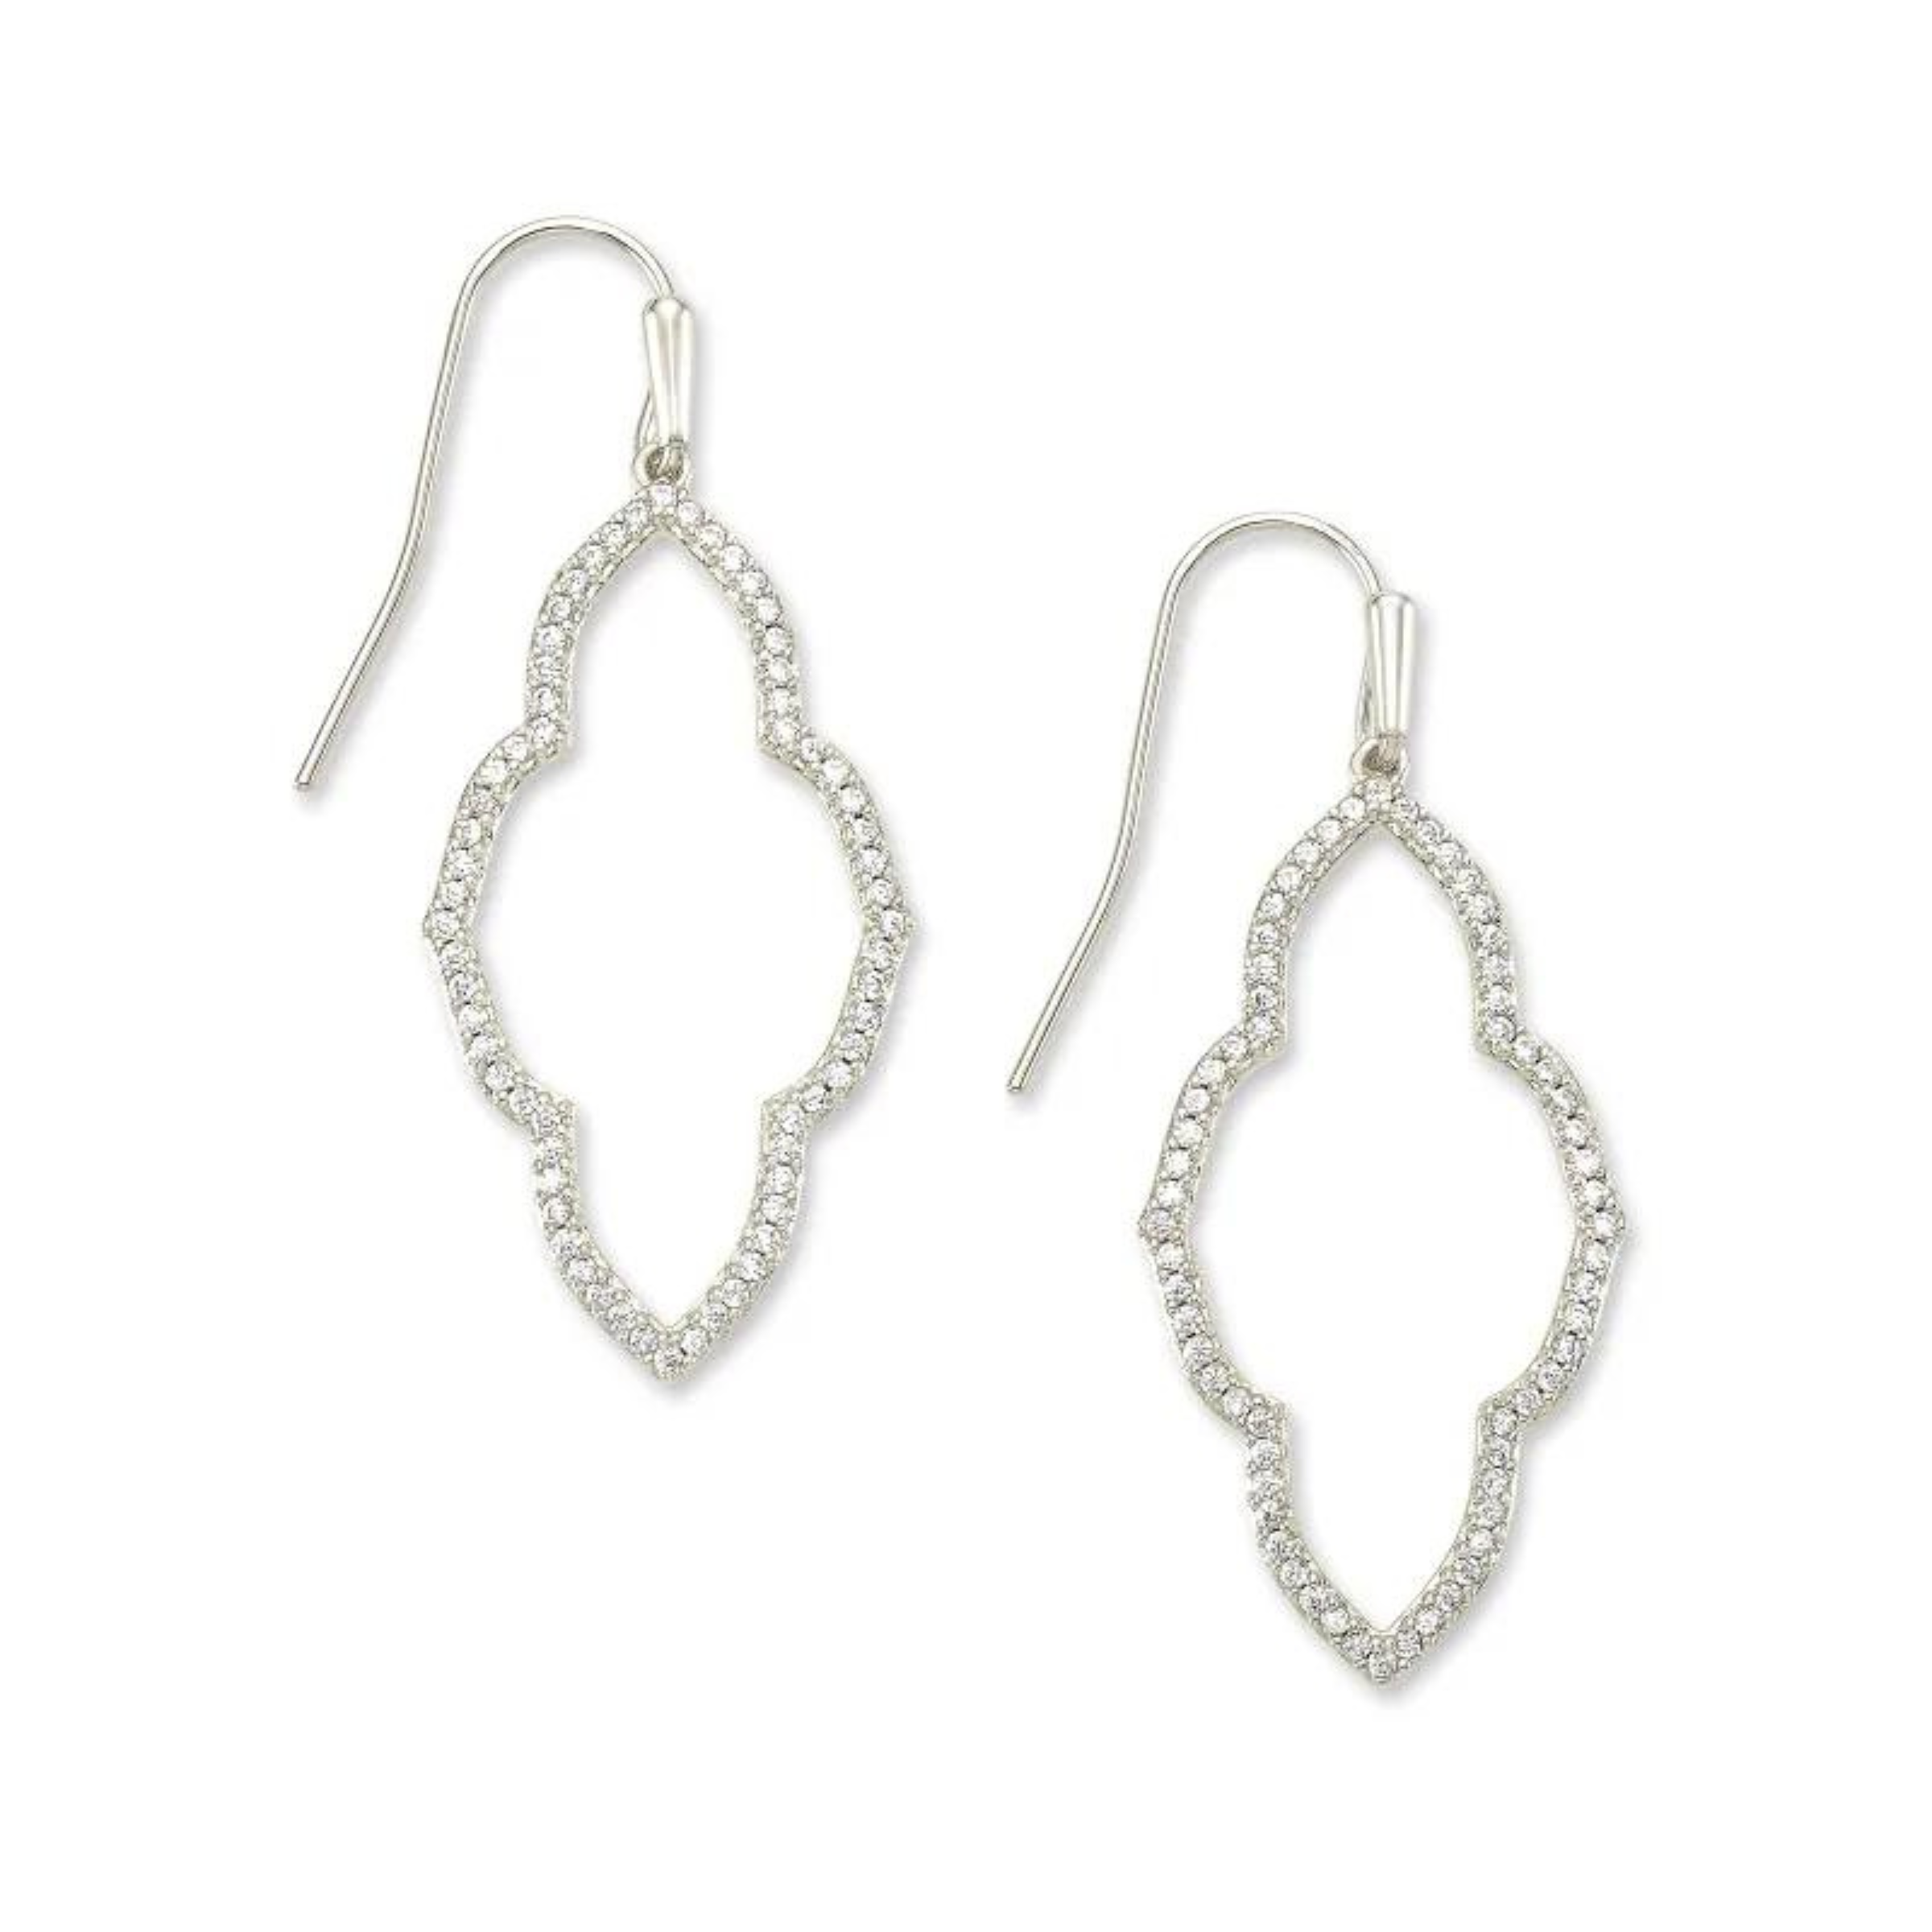 Silver open drop earrings with white crystals. These earrings are pictured on a white background. 